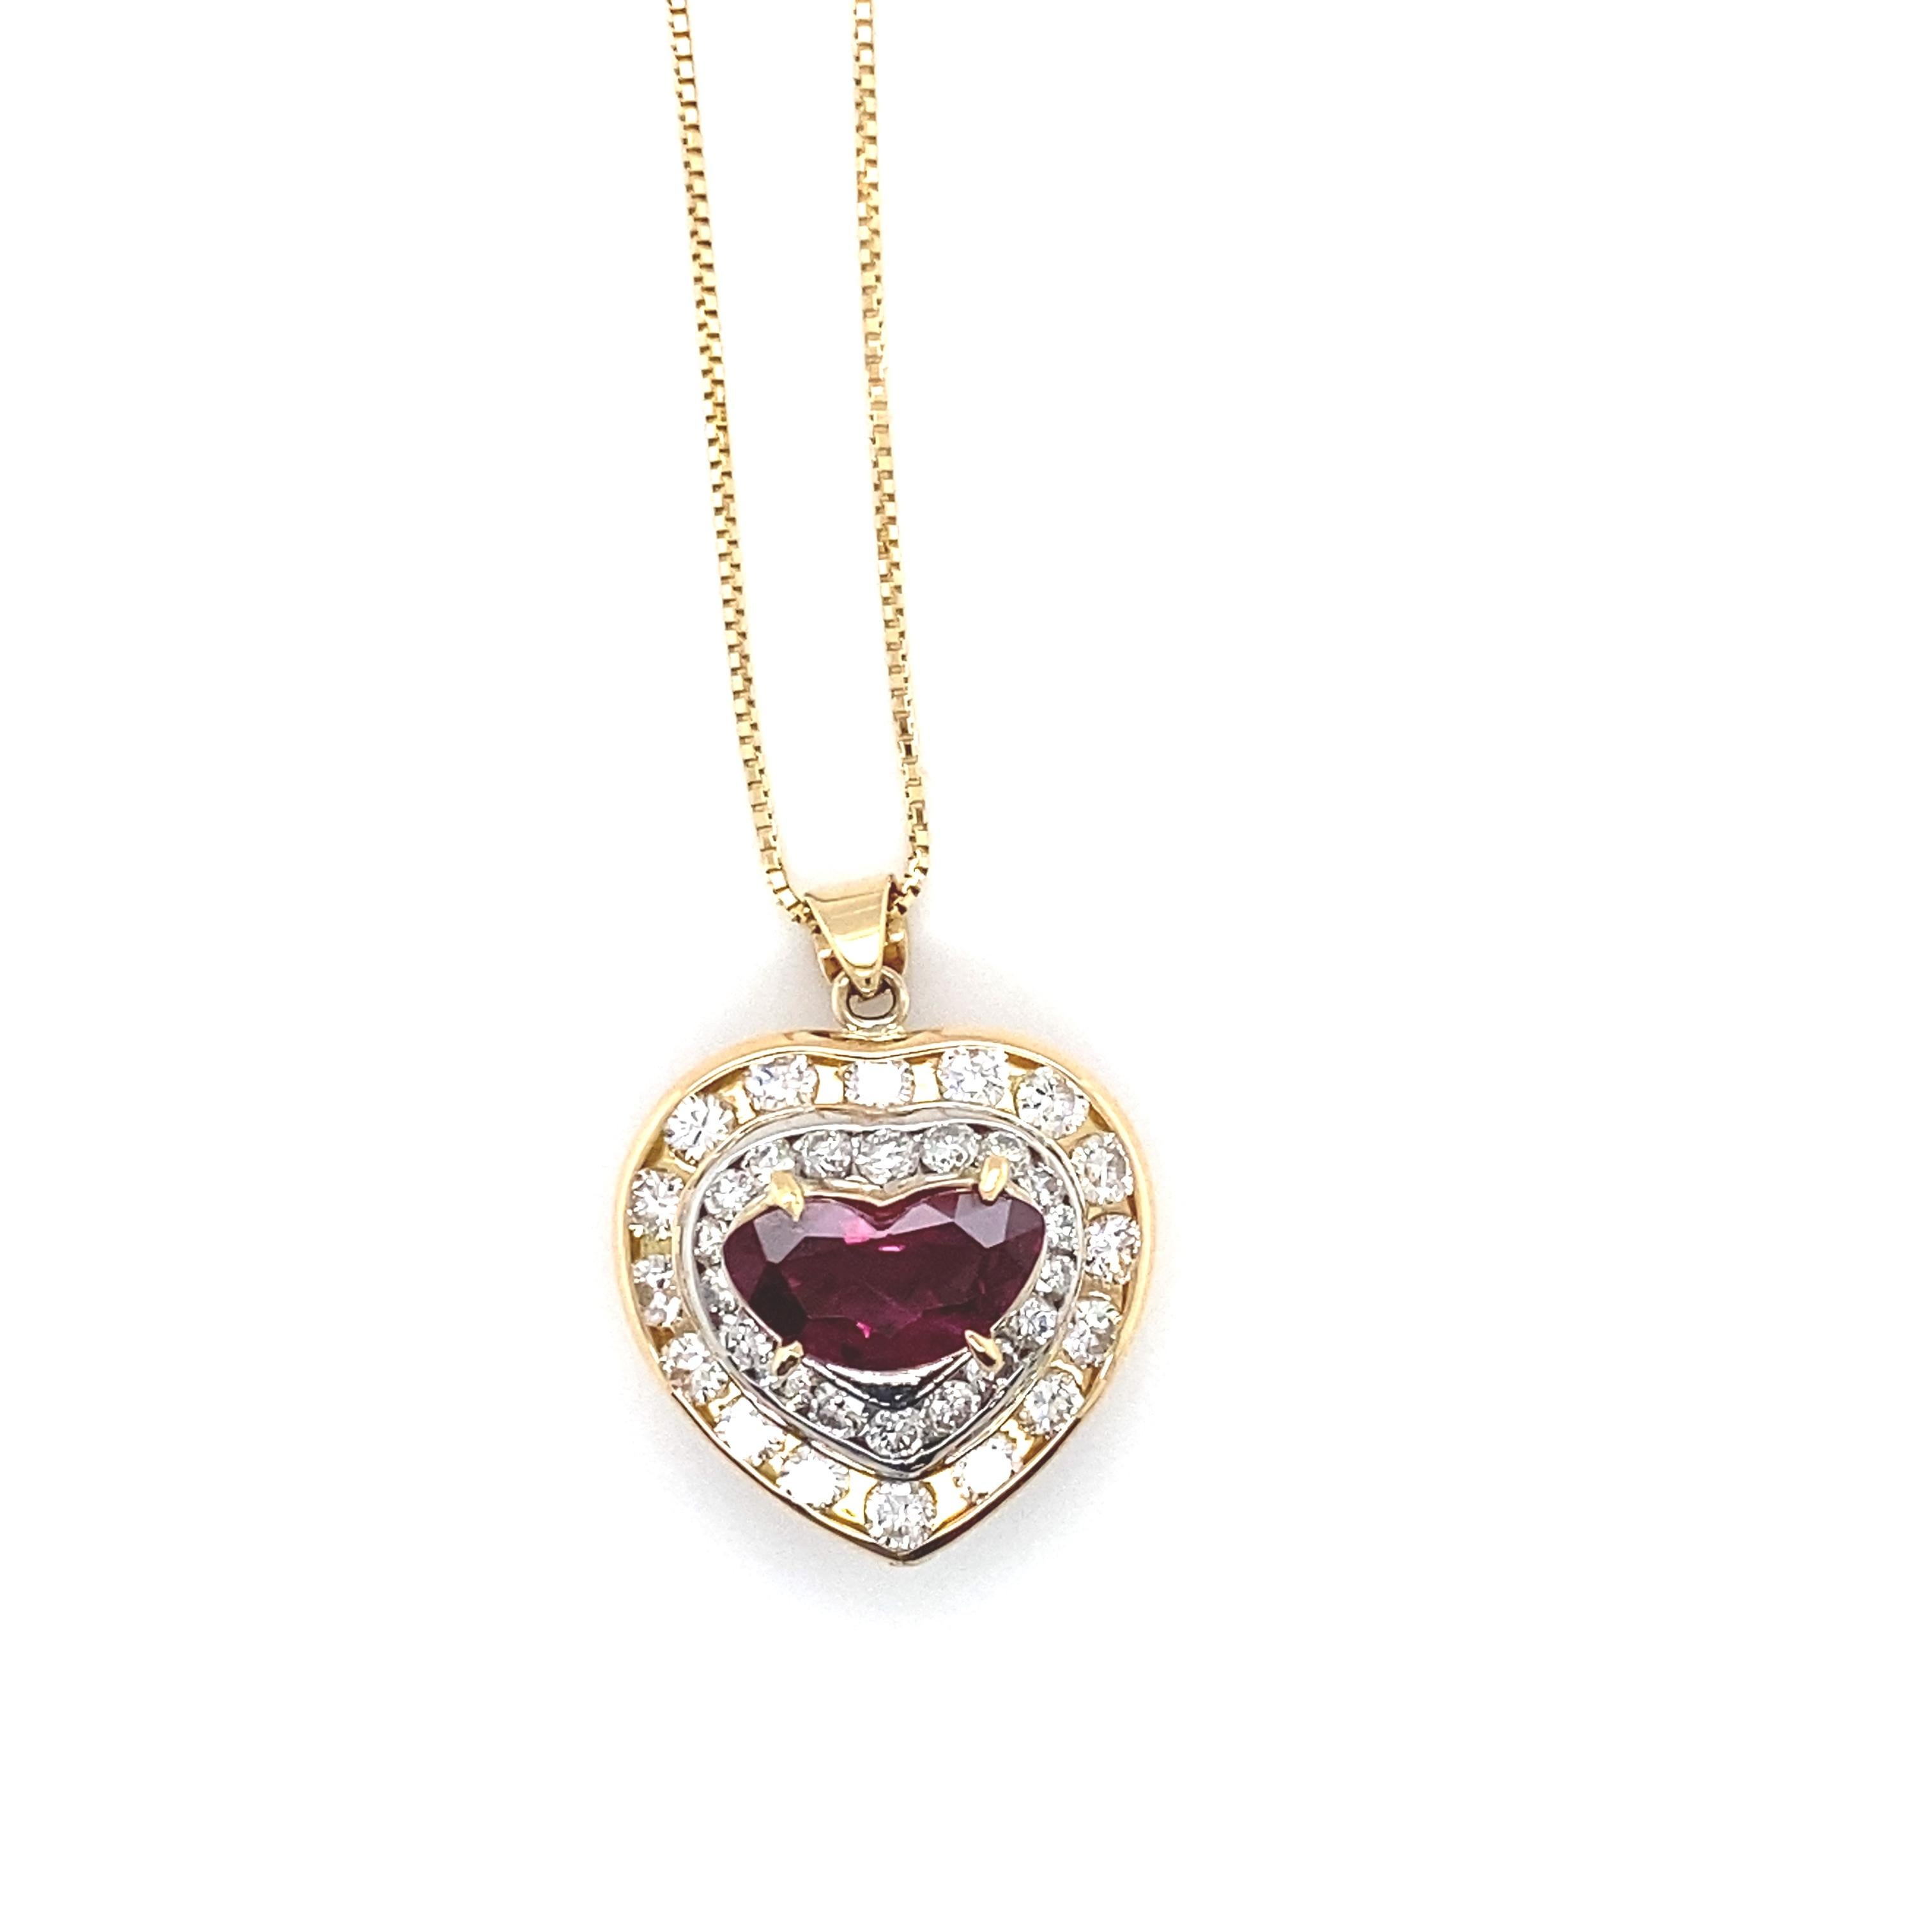 A stunning Pendant Necklace featuring a GIA Certified 2.17 Carat Natural, Thai, Heated Ruby and 2.02 Carats of Diamond Accents set in 18K Yellow Gold. Rubies are referred to as 